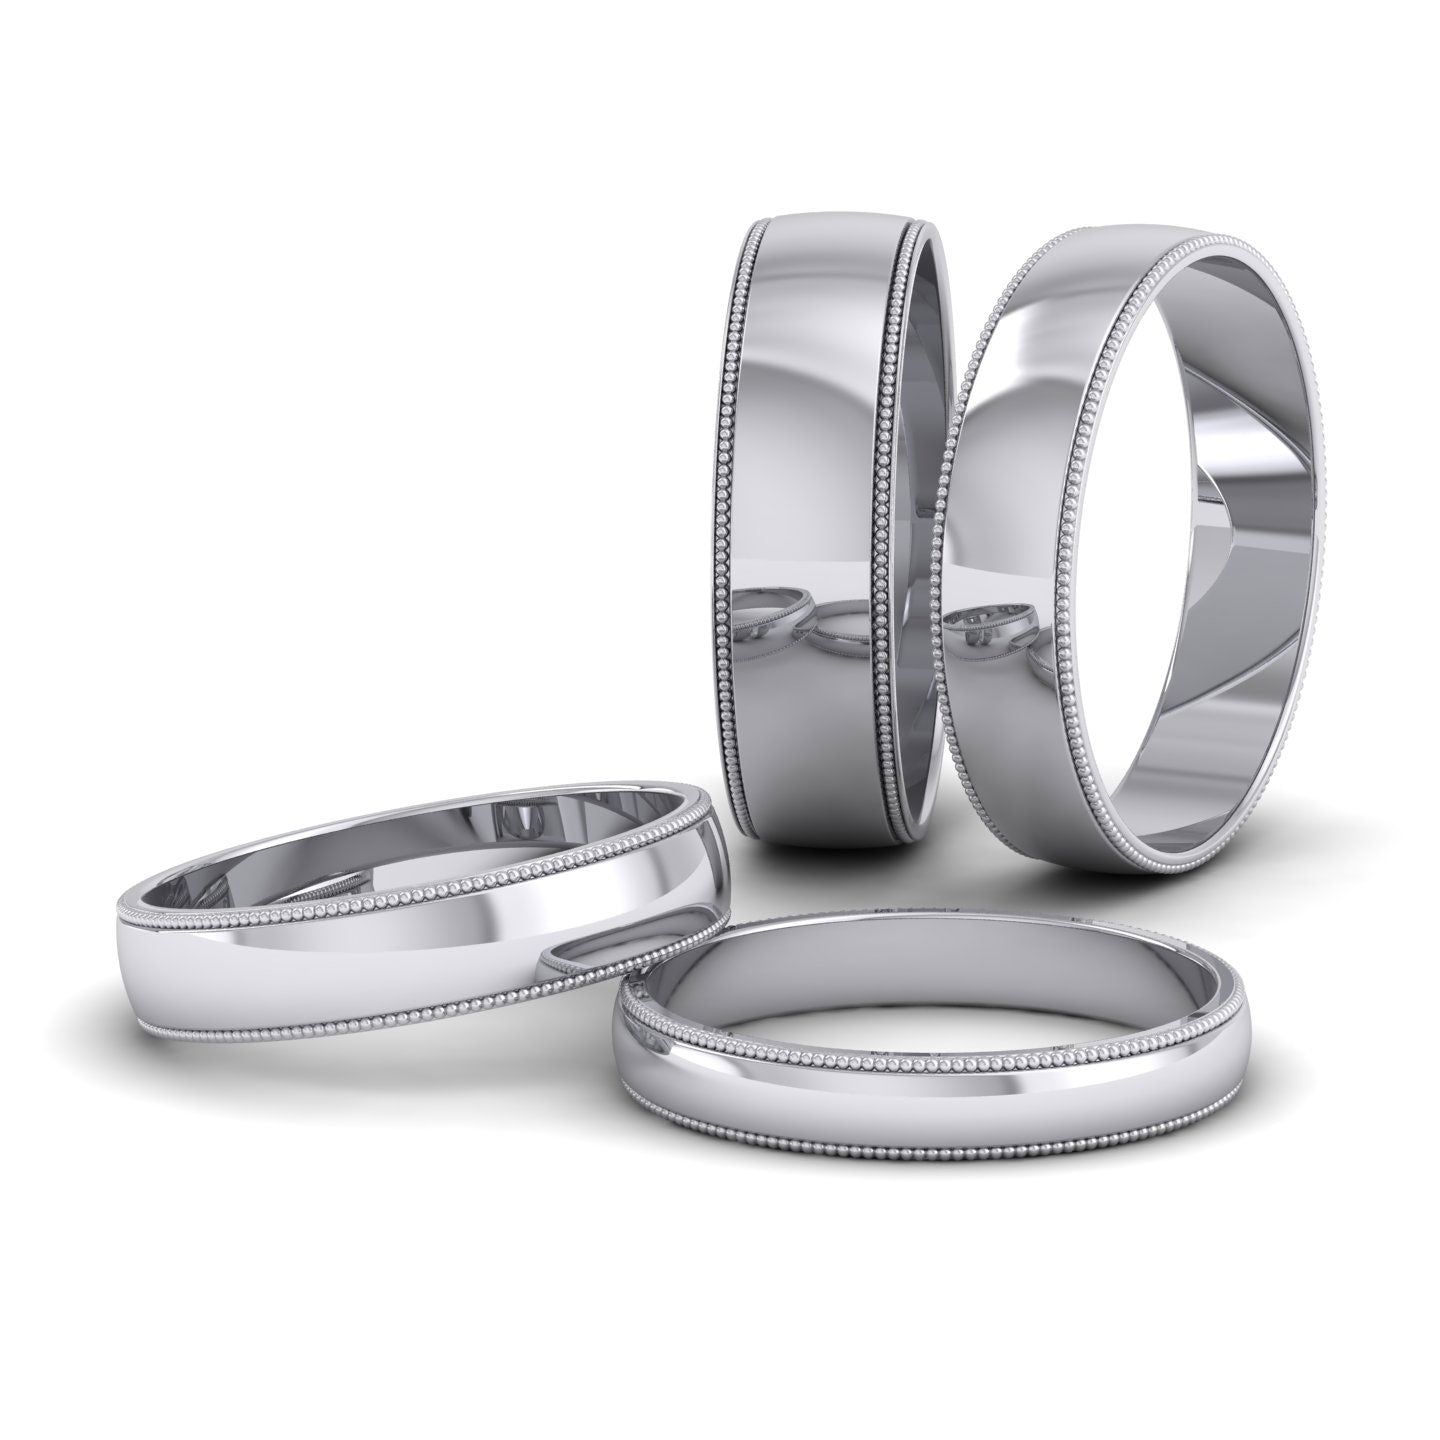 Millgrained Edge 18ct White Gold 4mm Wedding Ring L